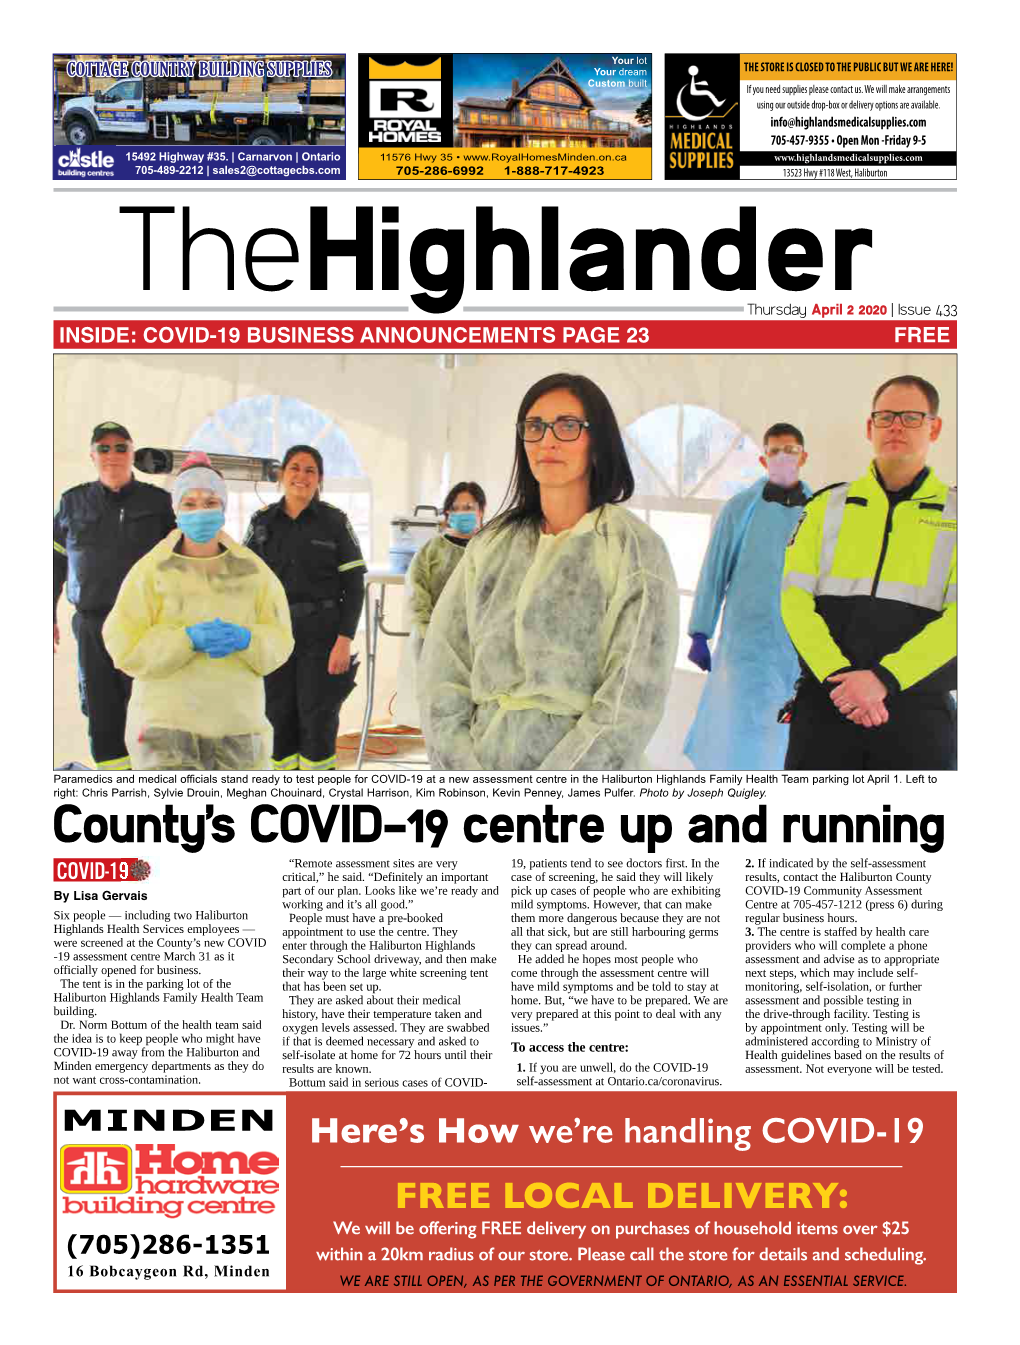 Highlanderthursday April 2 2020 | Issue 433 INSIDE: COVID-19 BUSINESS ANNOUNCEMENTS PAGE 23 FREE